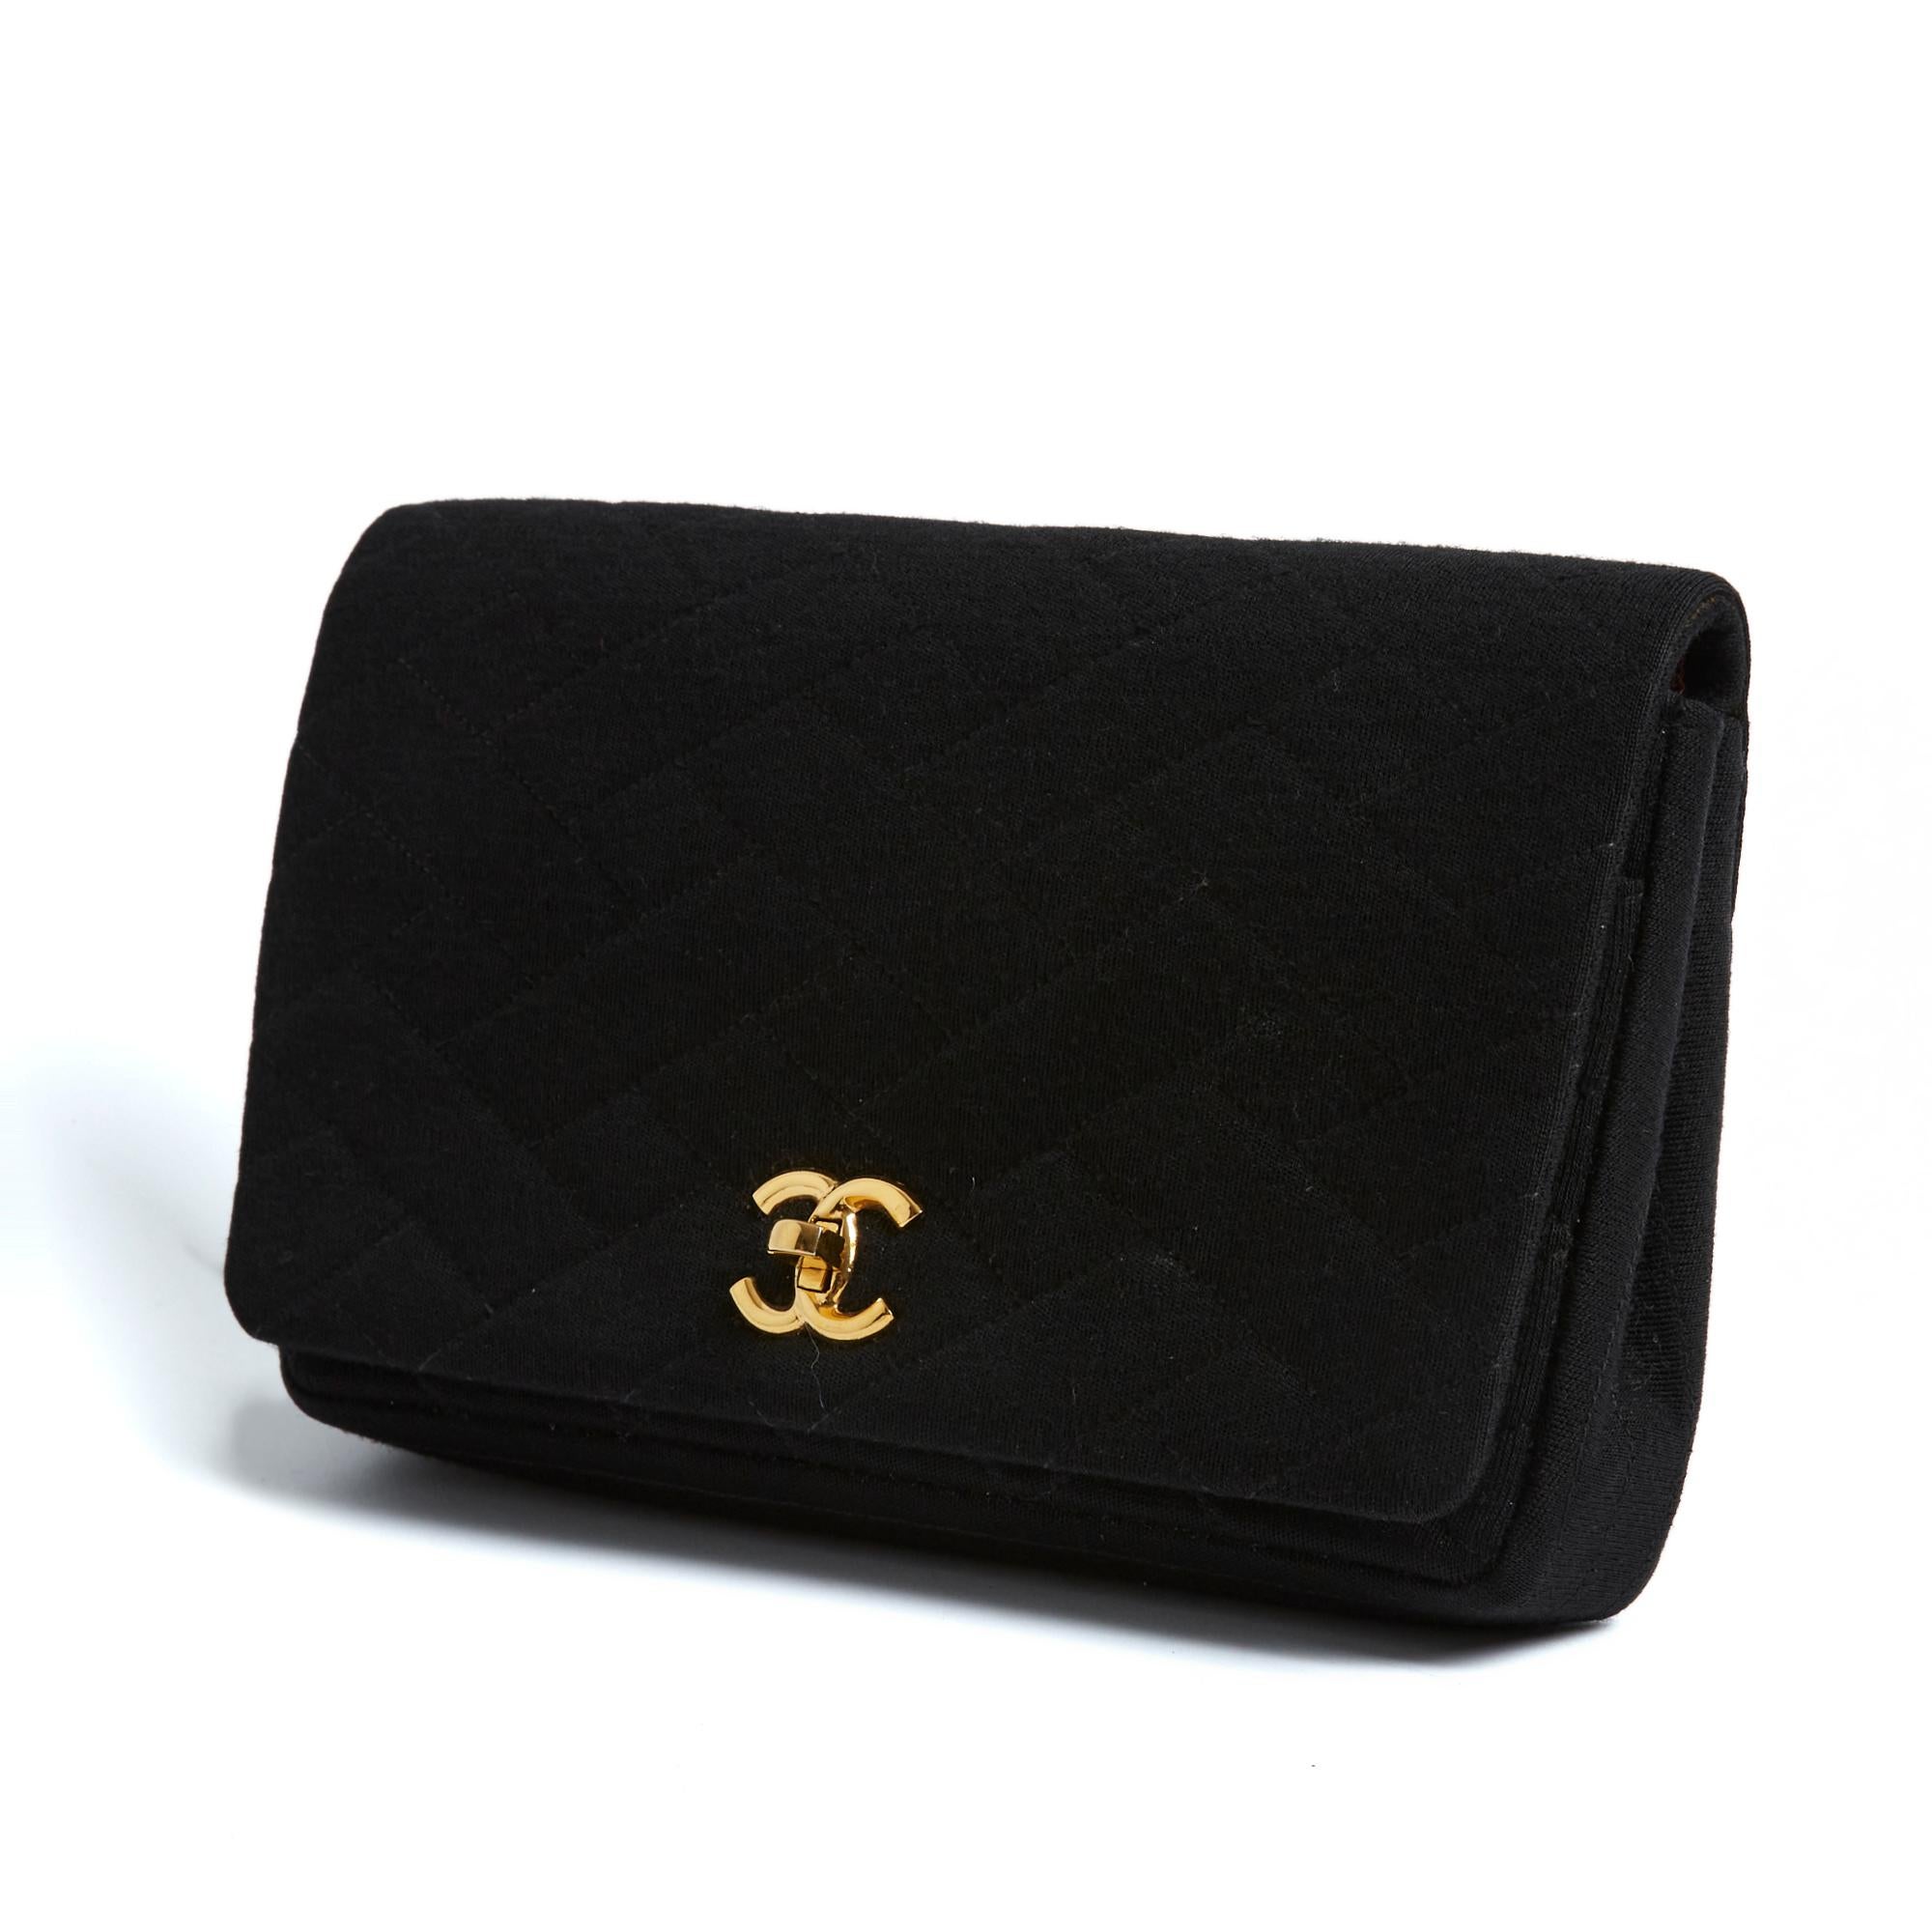 Chanel clutch Timeless or Classique series in black quilted wool jersey, front flap with quarter-turn CC or Turnlock clasp in gilt metal, burgundy leather interior with 1 zipped pocket and a double patch pocket, as well as a large front pocket,